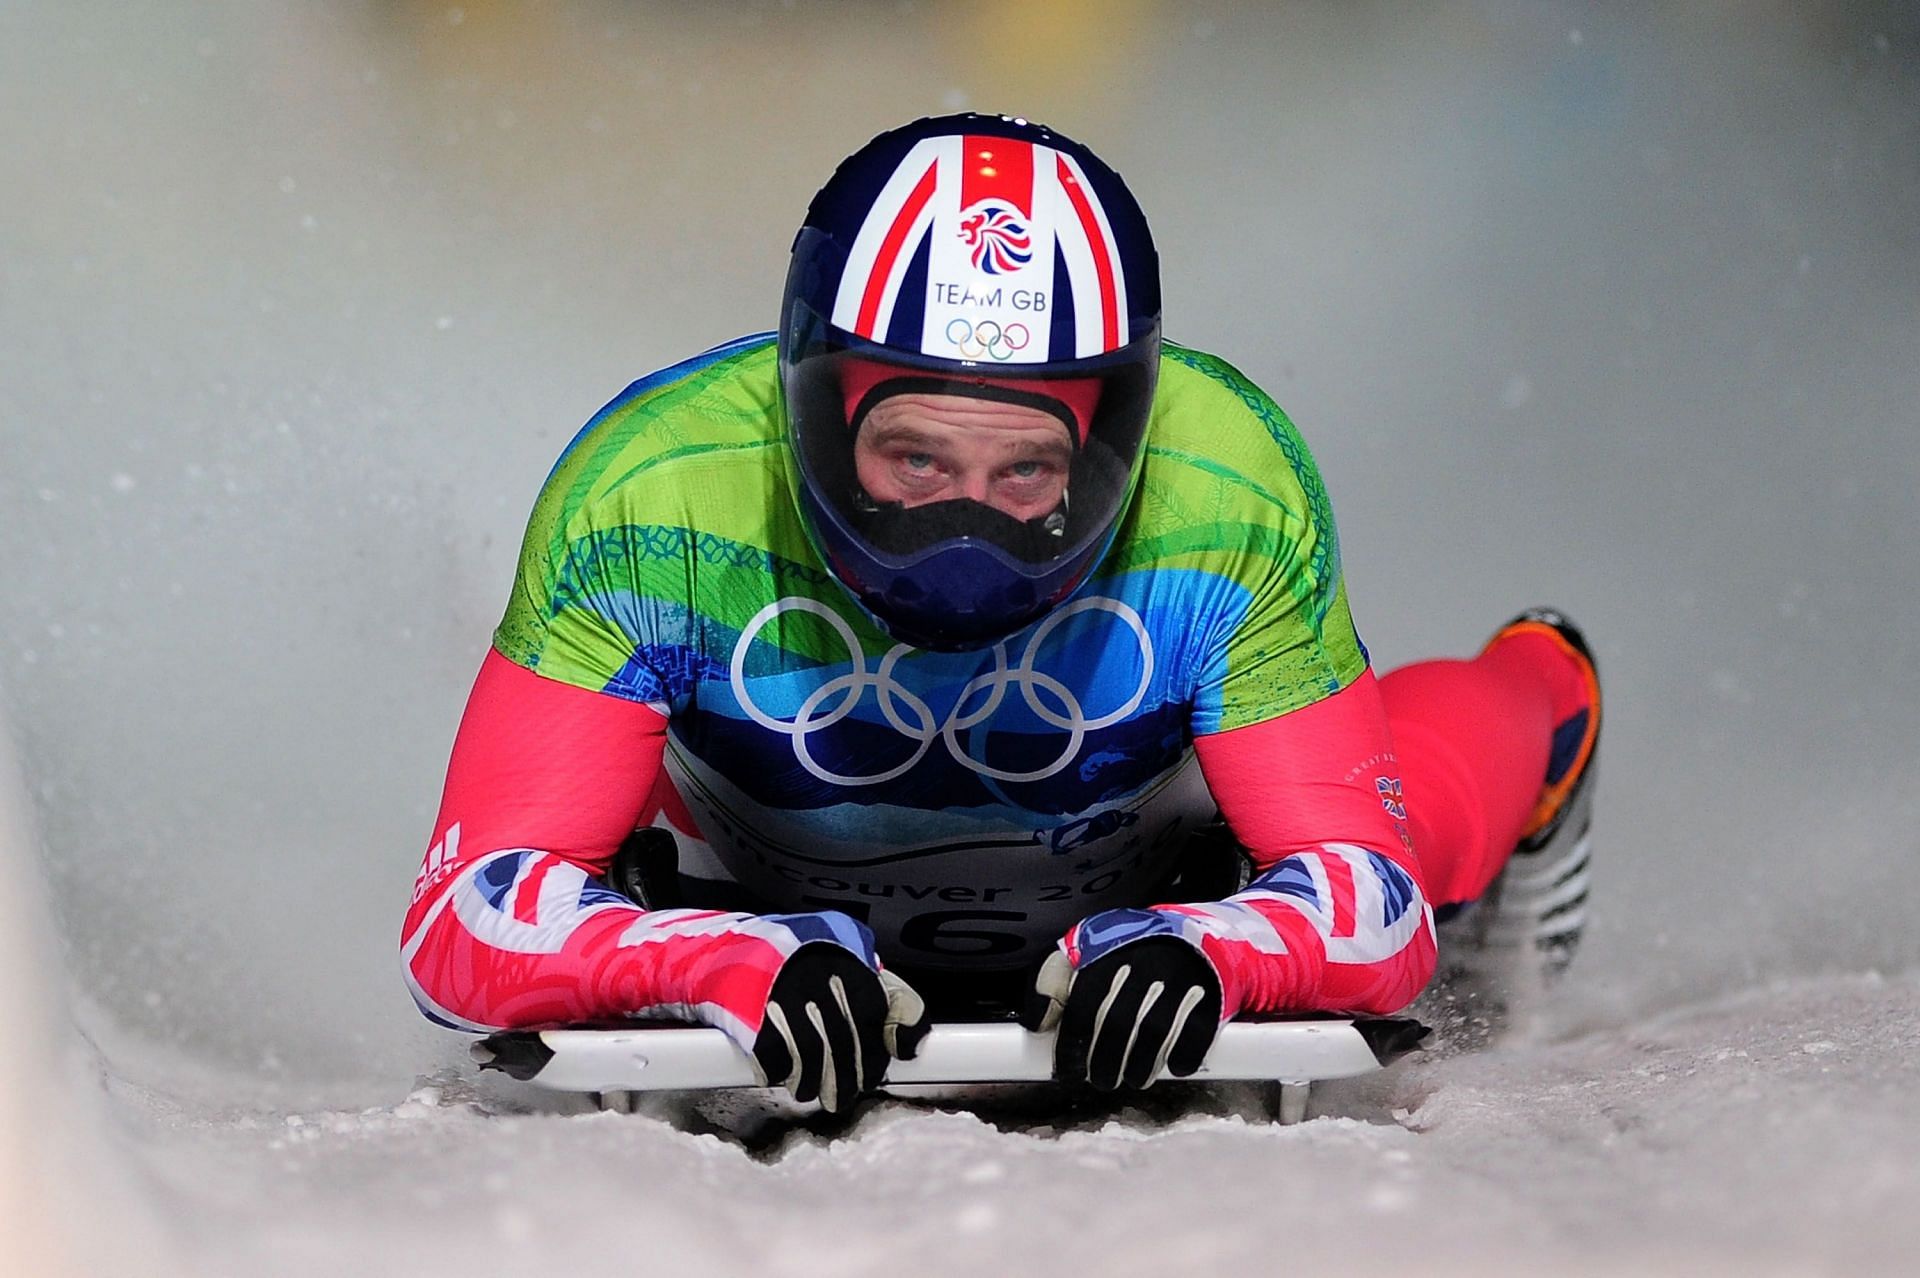 Adam Pengilly, who was part of Team GB&#039;s skeleton team, in action at the 2010 Winter Olympics in Vancouver. (Getty Images)